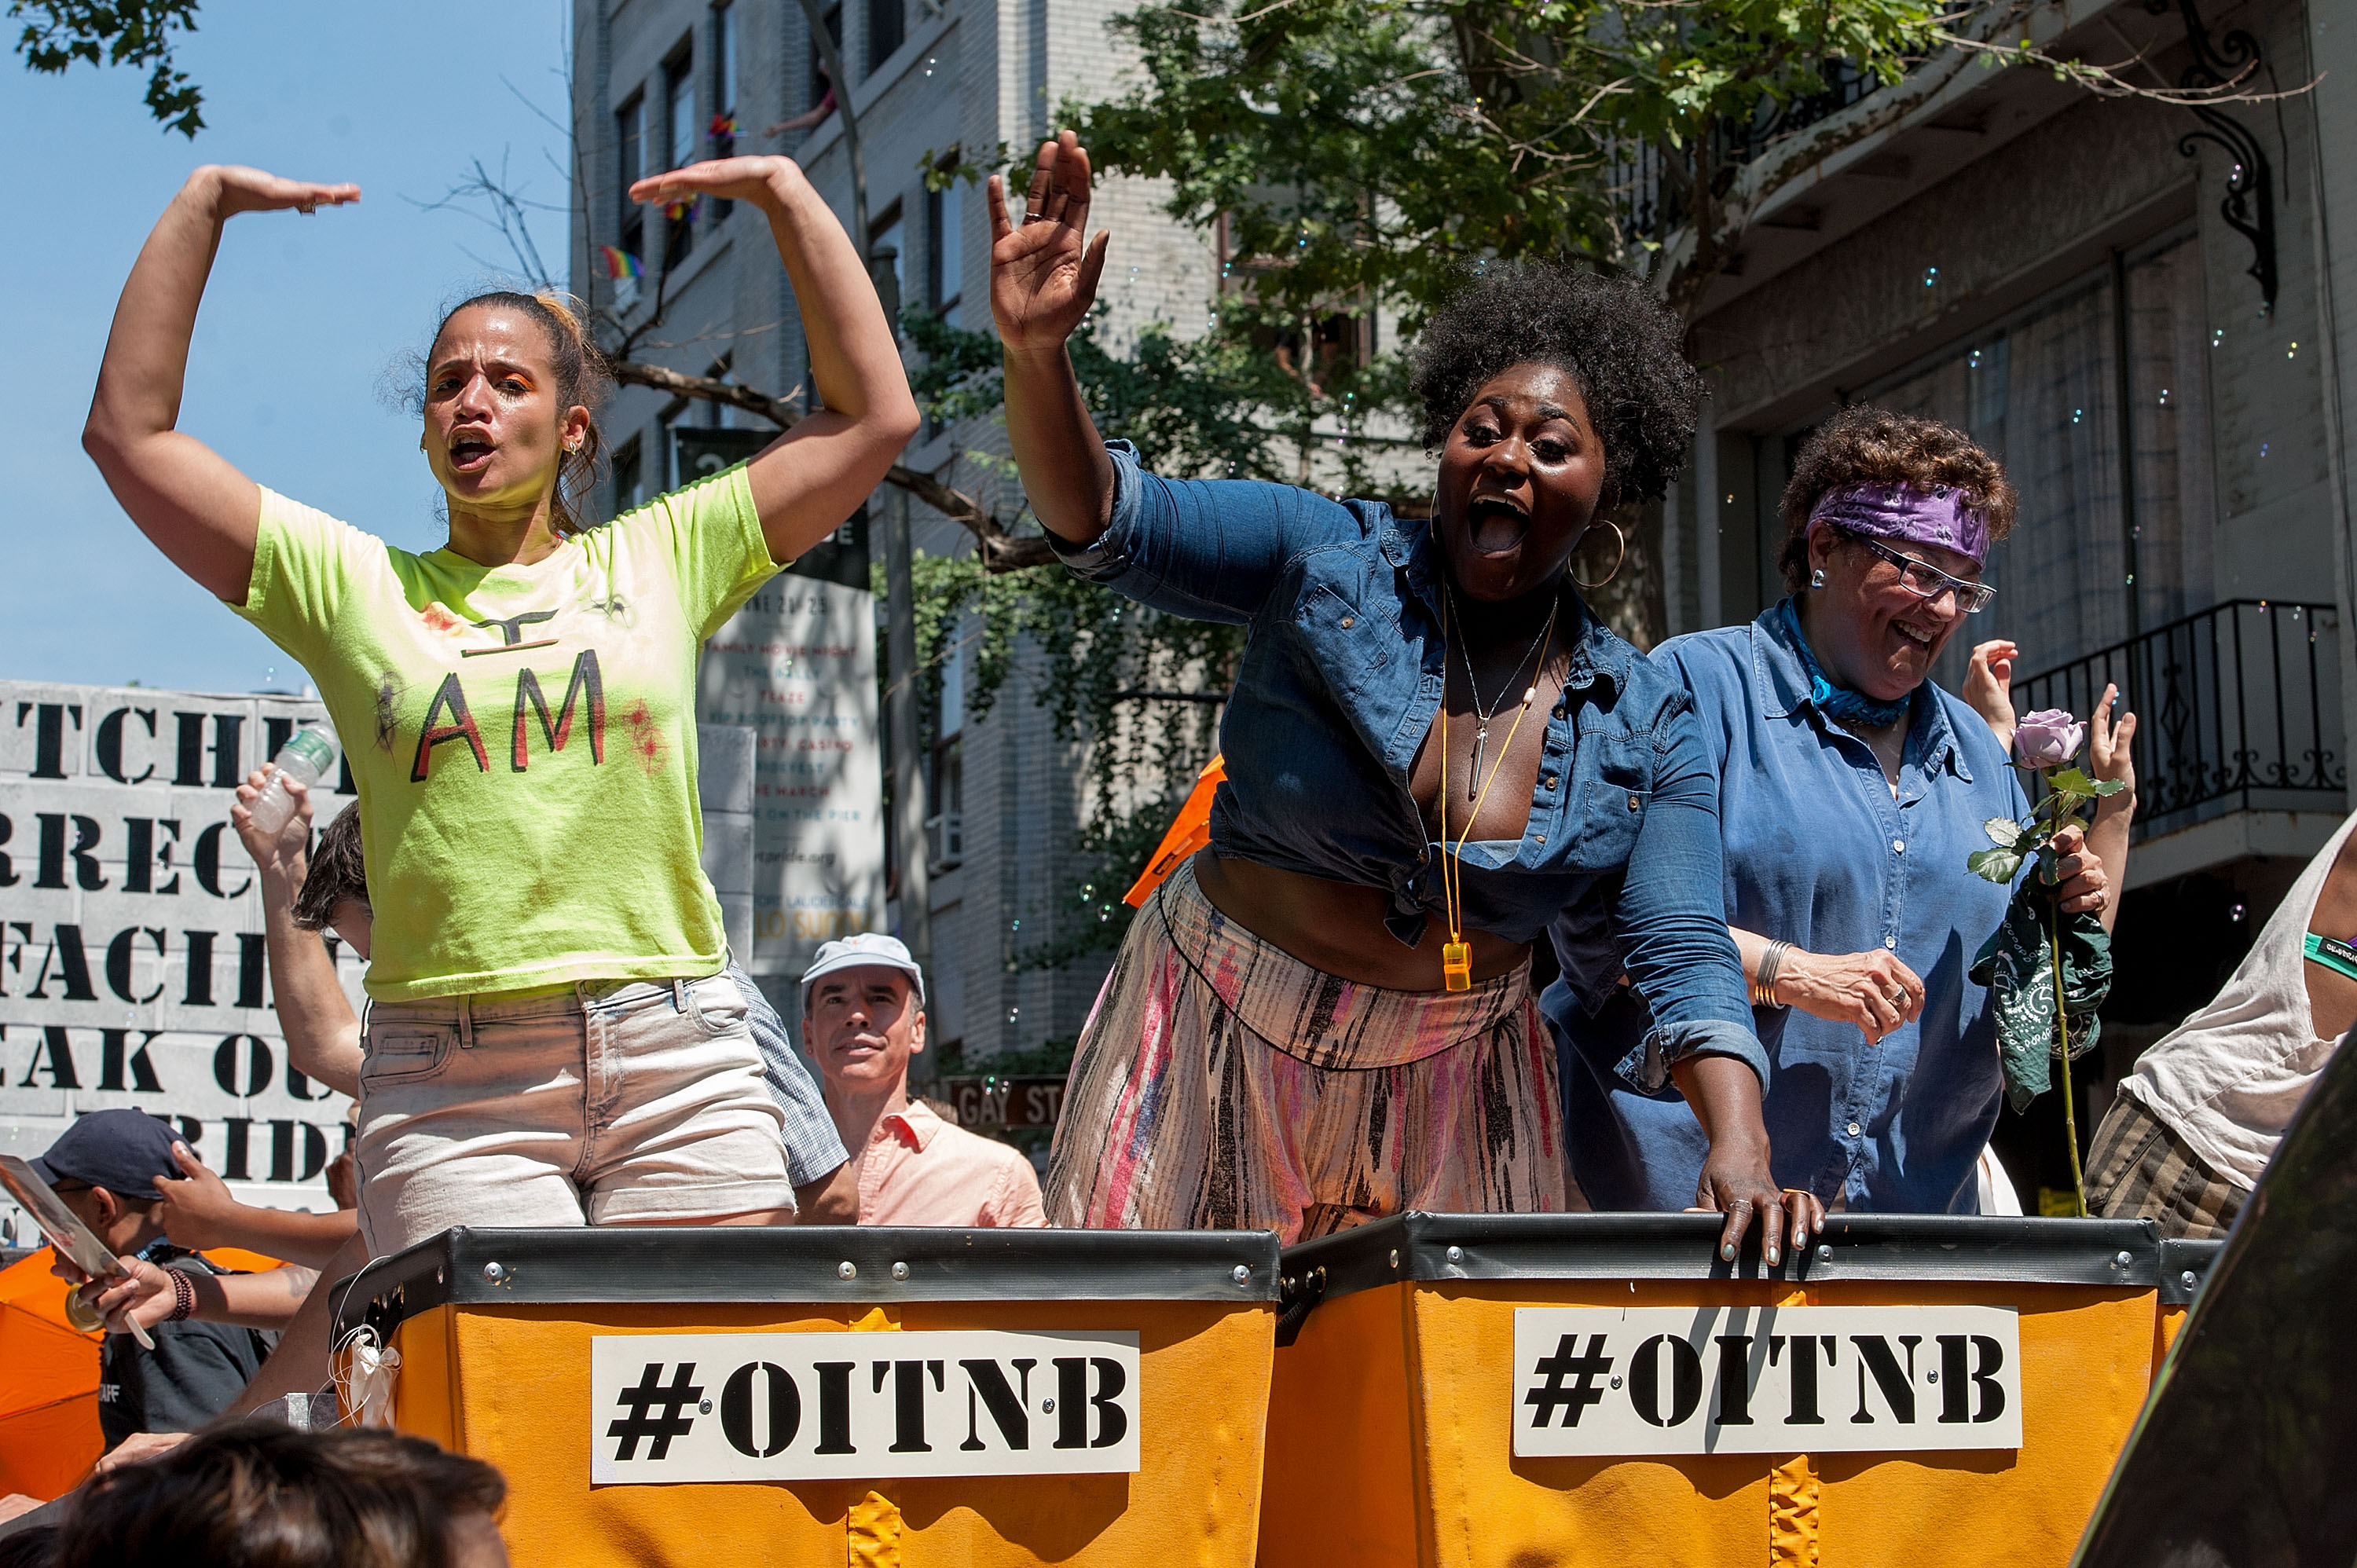 From left, <i>Orange Is the New Black</i> cast members Dascha Polanco, Danielle Brooks and Barbara Rosenblat attend the New York City pride march on June 29, 2014 (D Dipasupil—Getty Images)